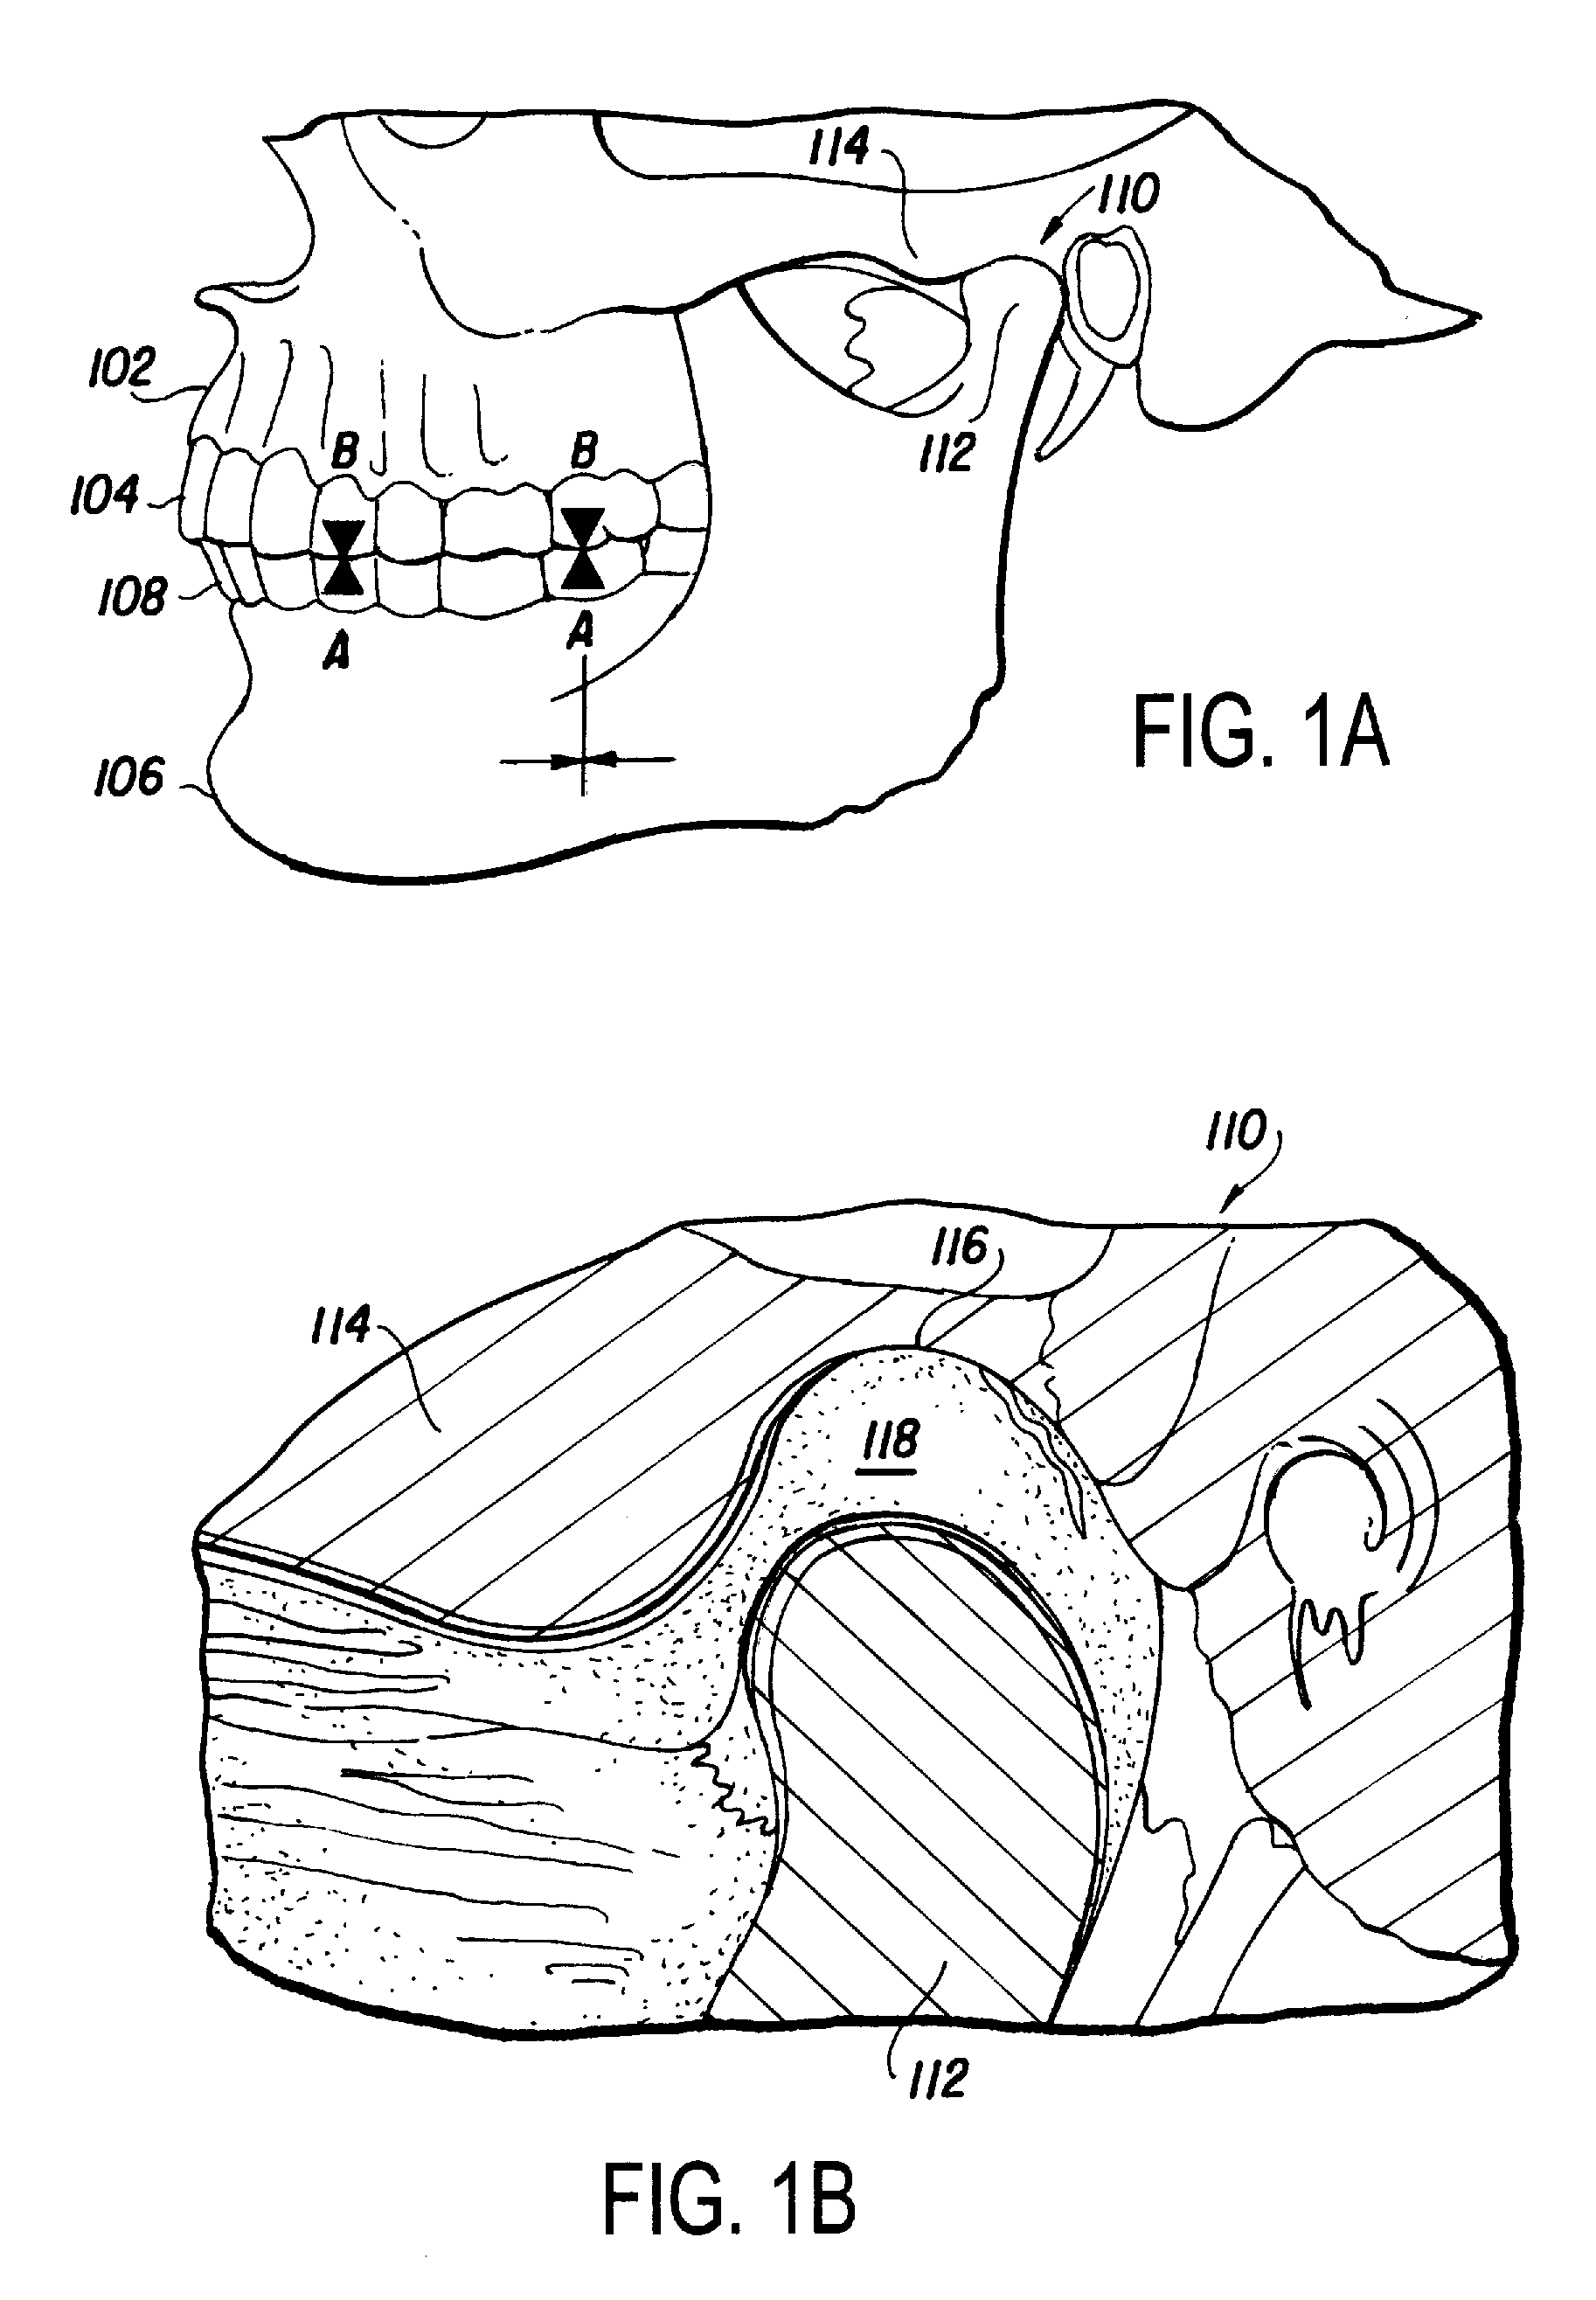 Musculoskeletal repositioning device